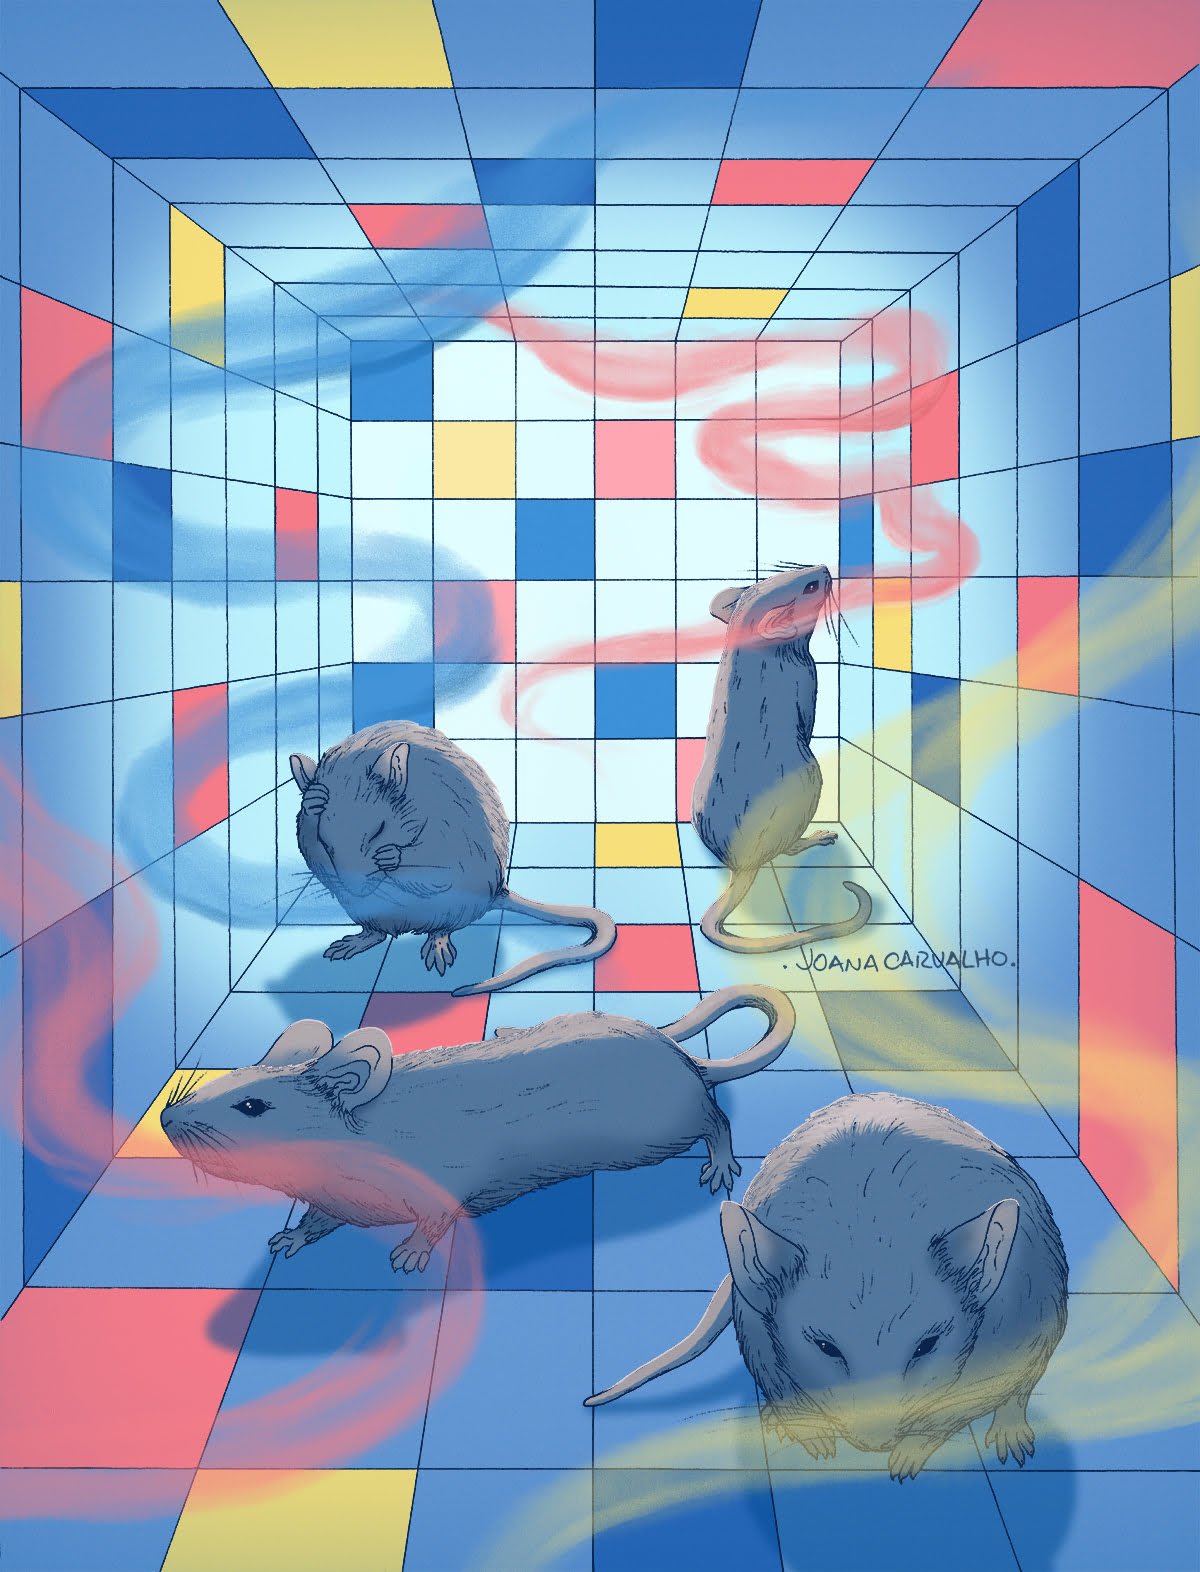 An illustration of four rats in an enclosed space, tiled with color squares